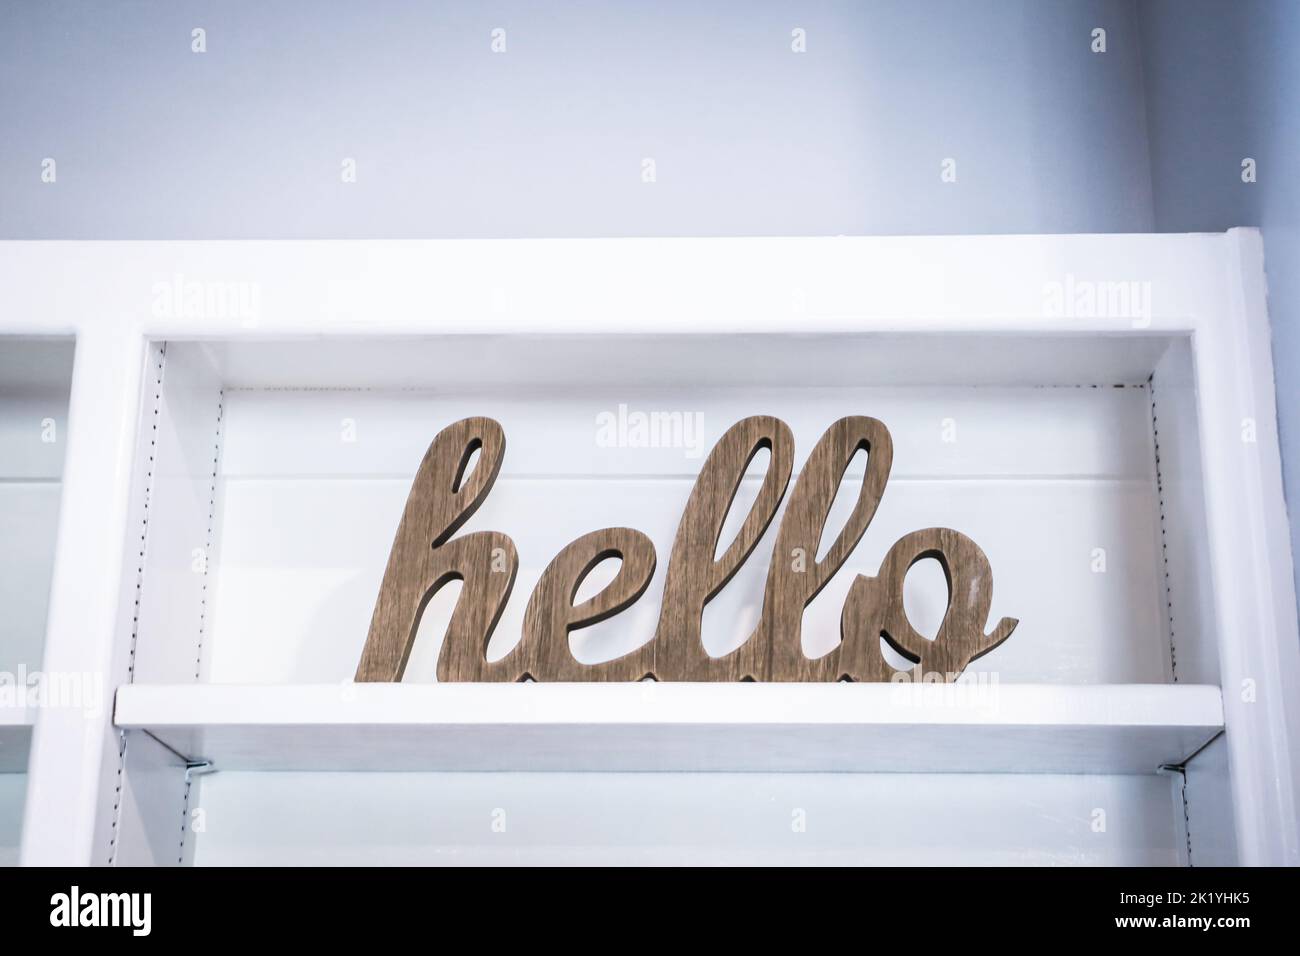 A hellow welcome sign to a house, open house or business sitting on a white shelf. Stock Photo